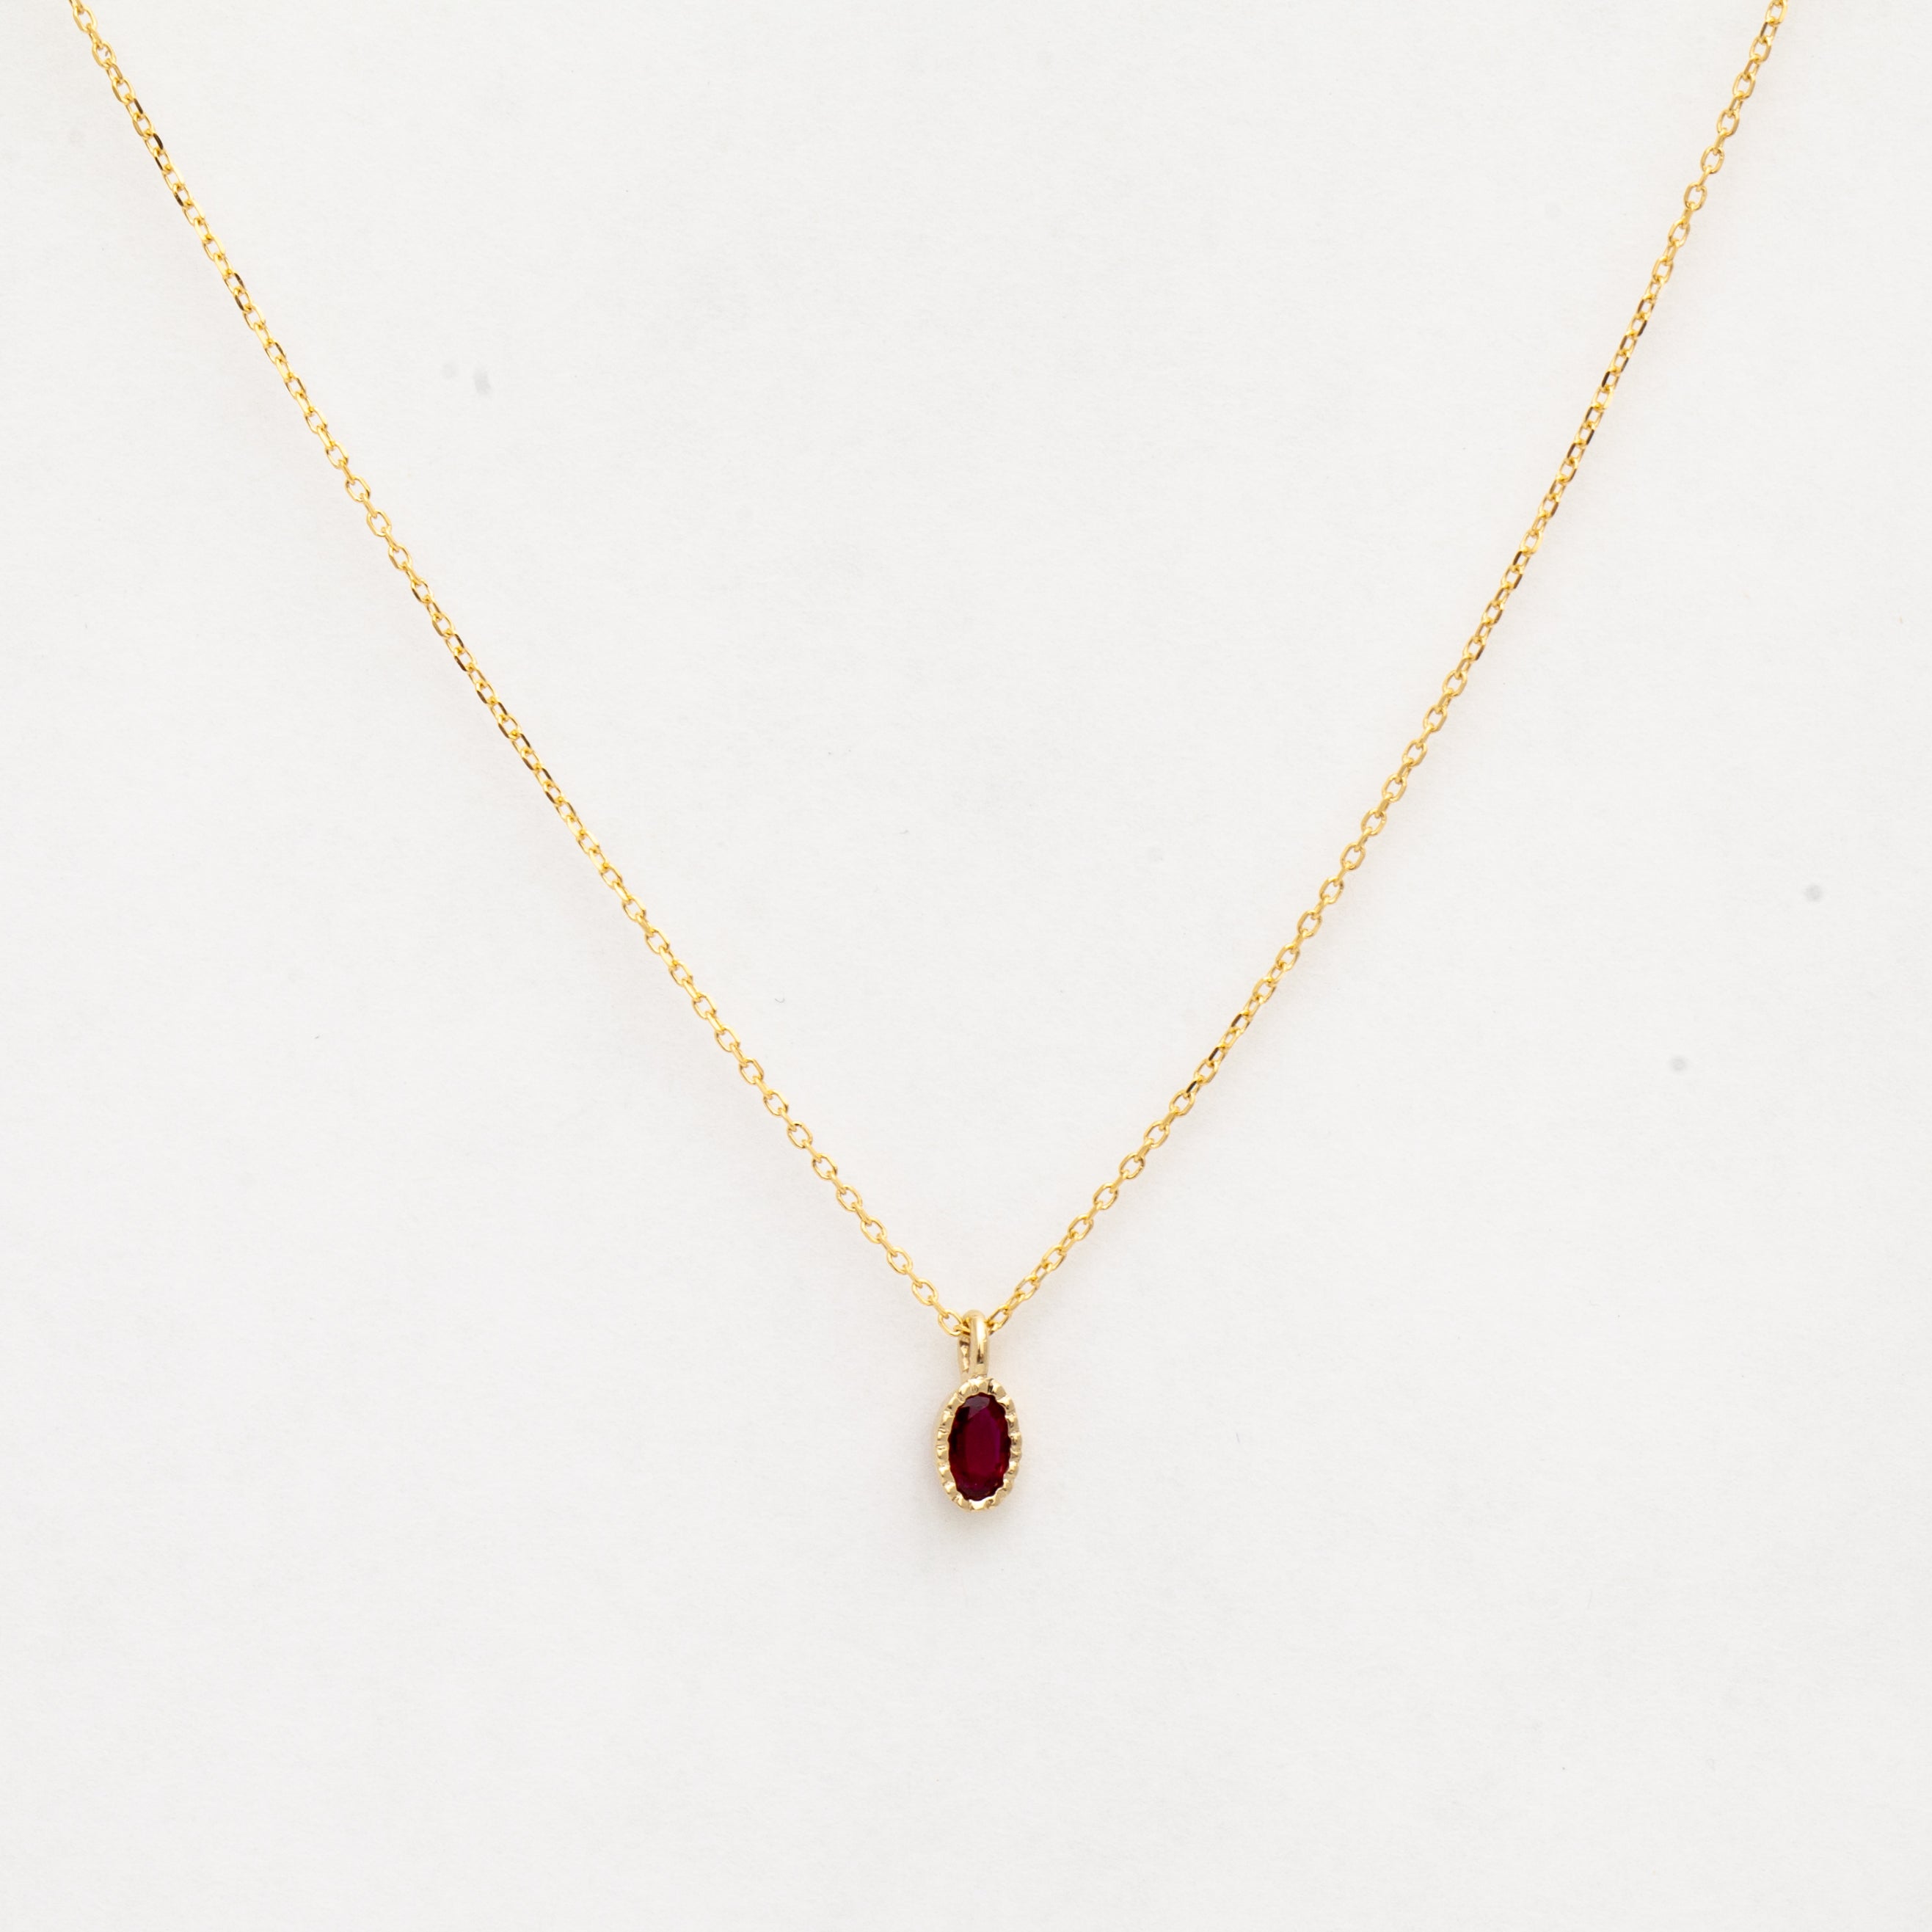 14K Solid Yellow Gold Ruby Necklace, 4mm Bezel Set Ruby Solitaire Necklace,  July Birthstone ,Minimalist Ruby Necklace in 14K Gold, Gemstone